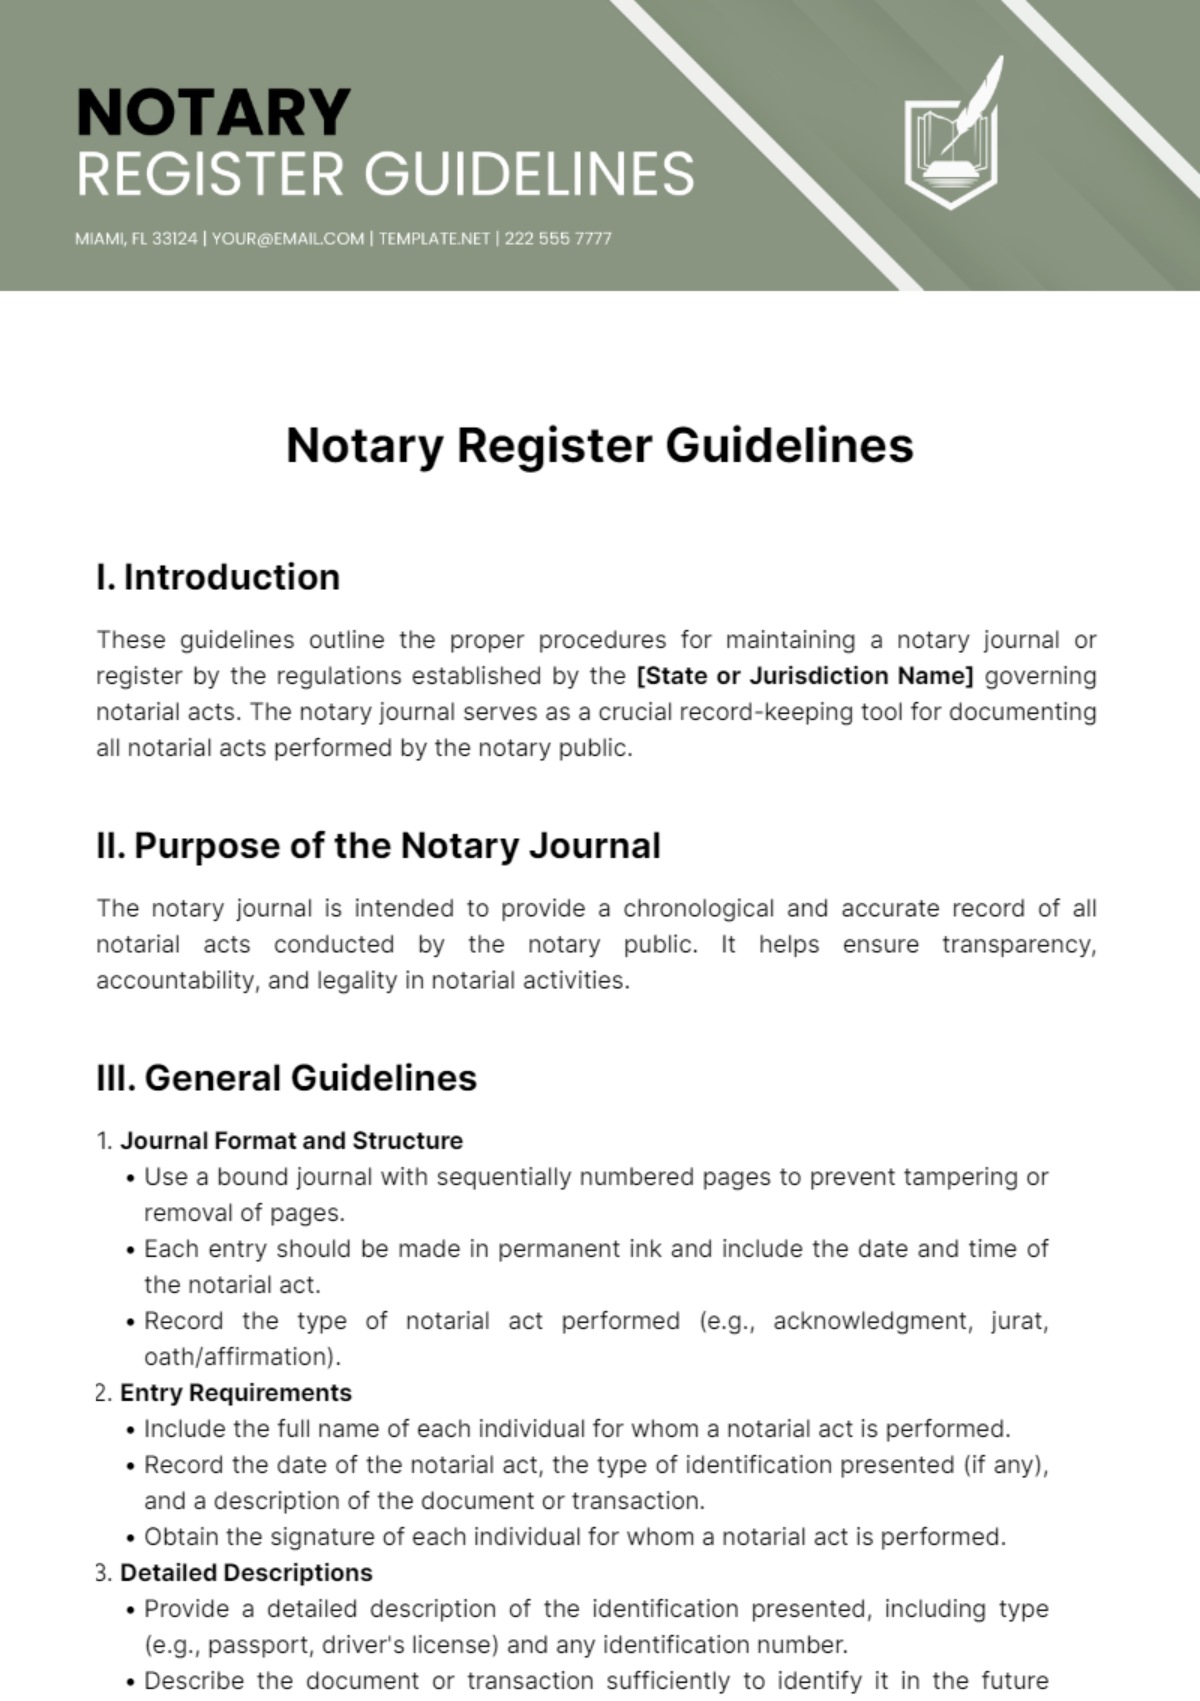 Notary Register Guidelines Template